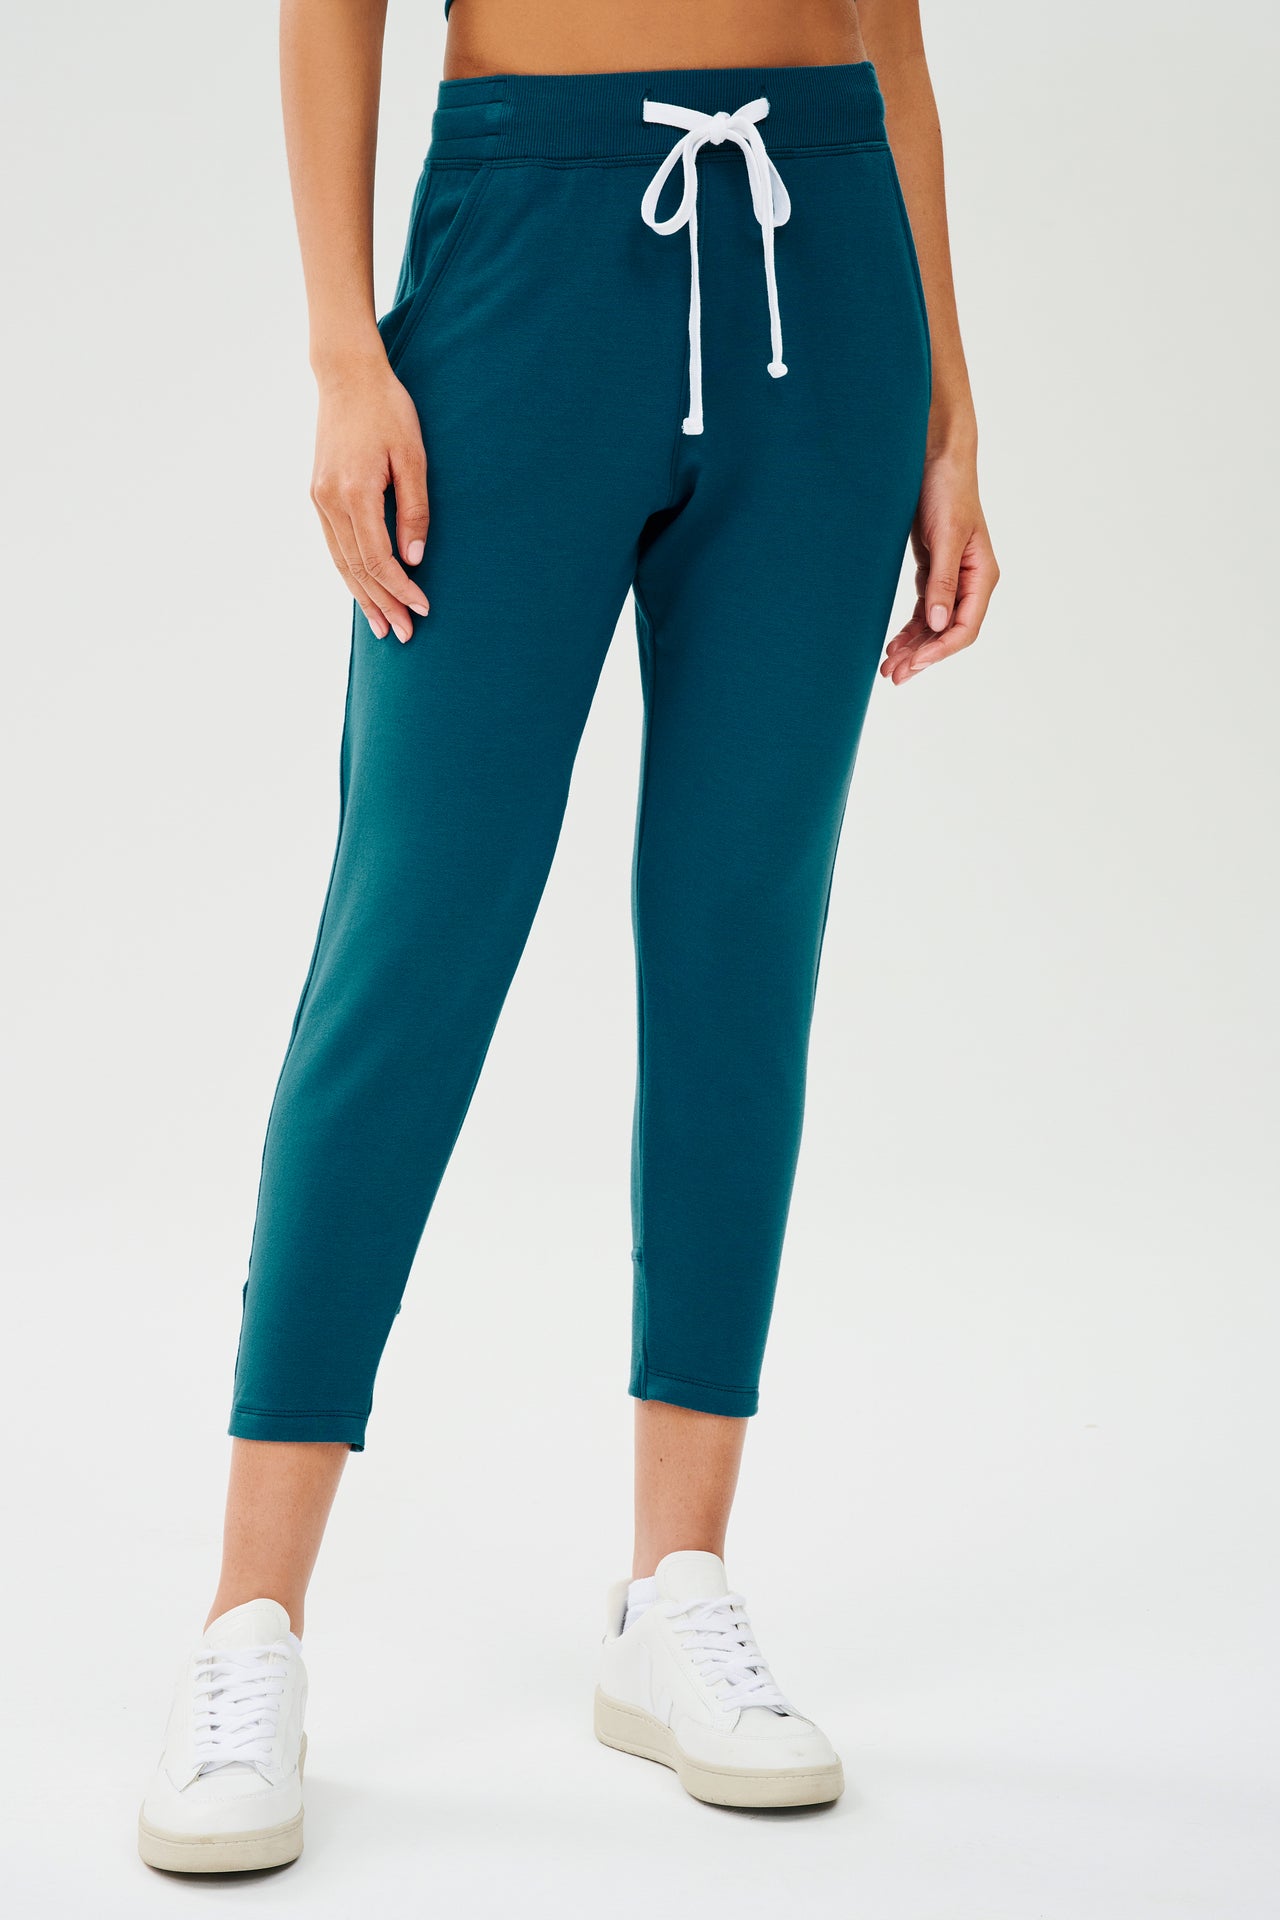 Front view of woman wearing a green and blue tone sweatpant with tapered leg and above ankle length with white drawstring and side hip pockets. Paired with white shoes. 